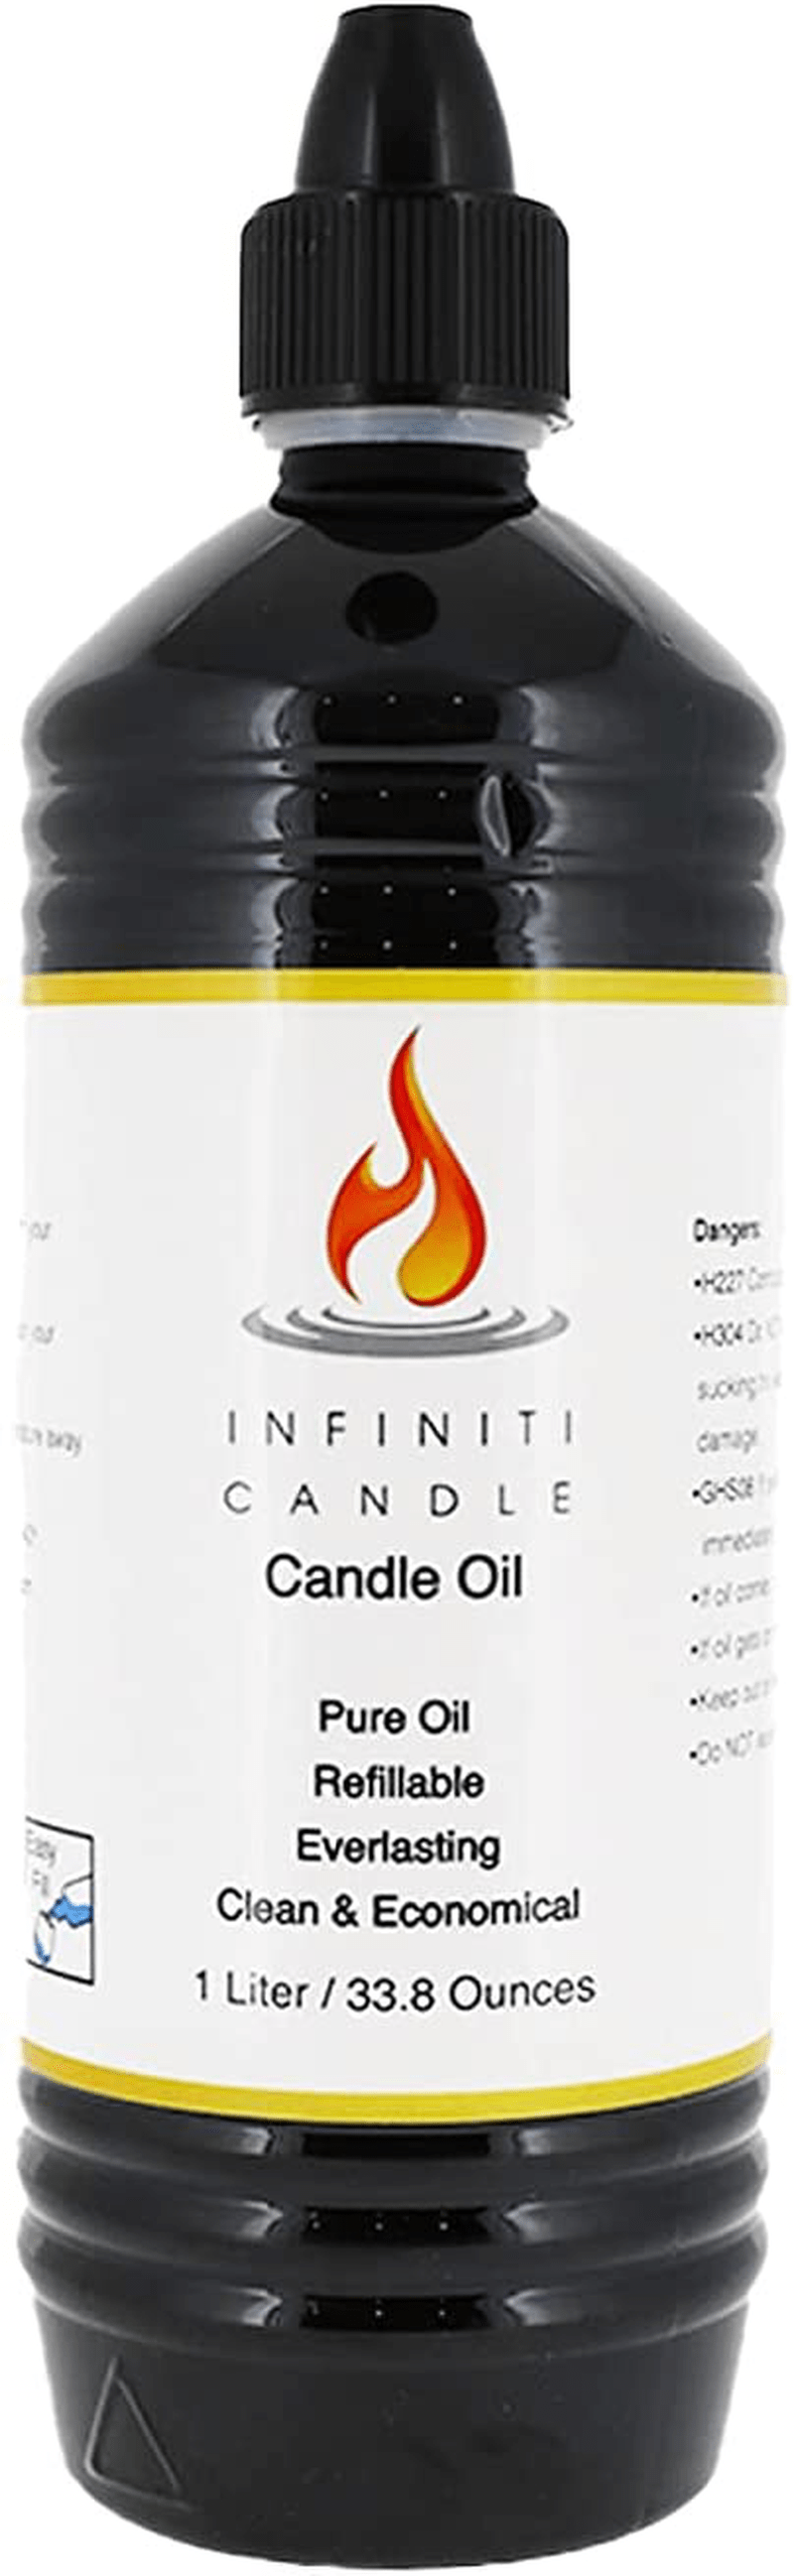 1 Liter Lamp Oil For Torches Lamp And Lanterns, Clear Fluid Safe For Indoor And Outdoor Use. Created For Infiniti Refillable Oil Candle. Unscented And Smokeless . Child safety cap and easy pour spout. Home & Garden > Lighting Accessories > Oil Lamp Fuel INFINITI CANDLE Default Title  